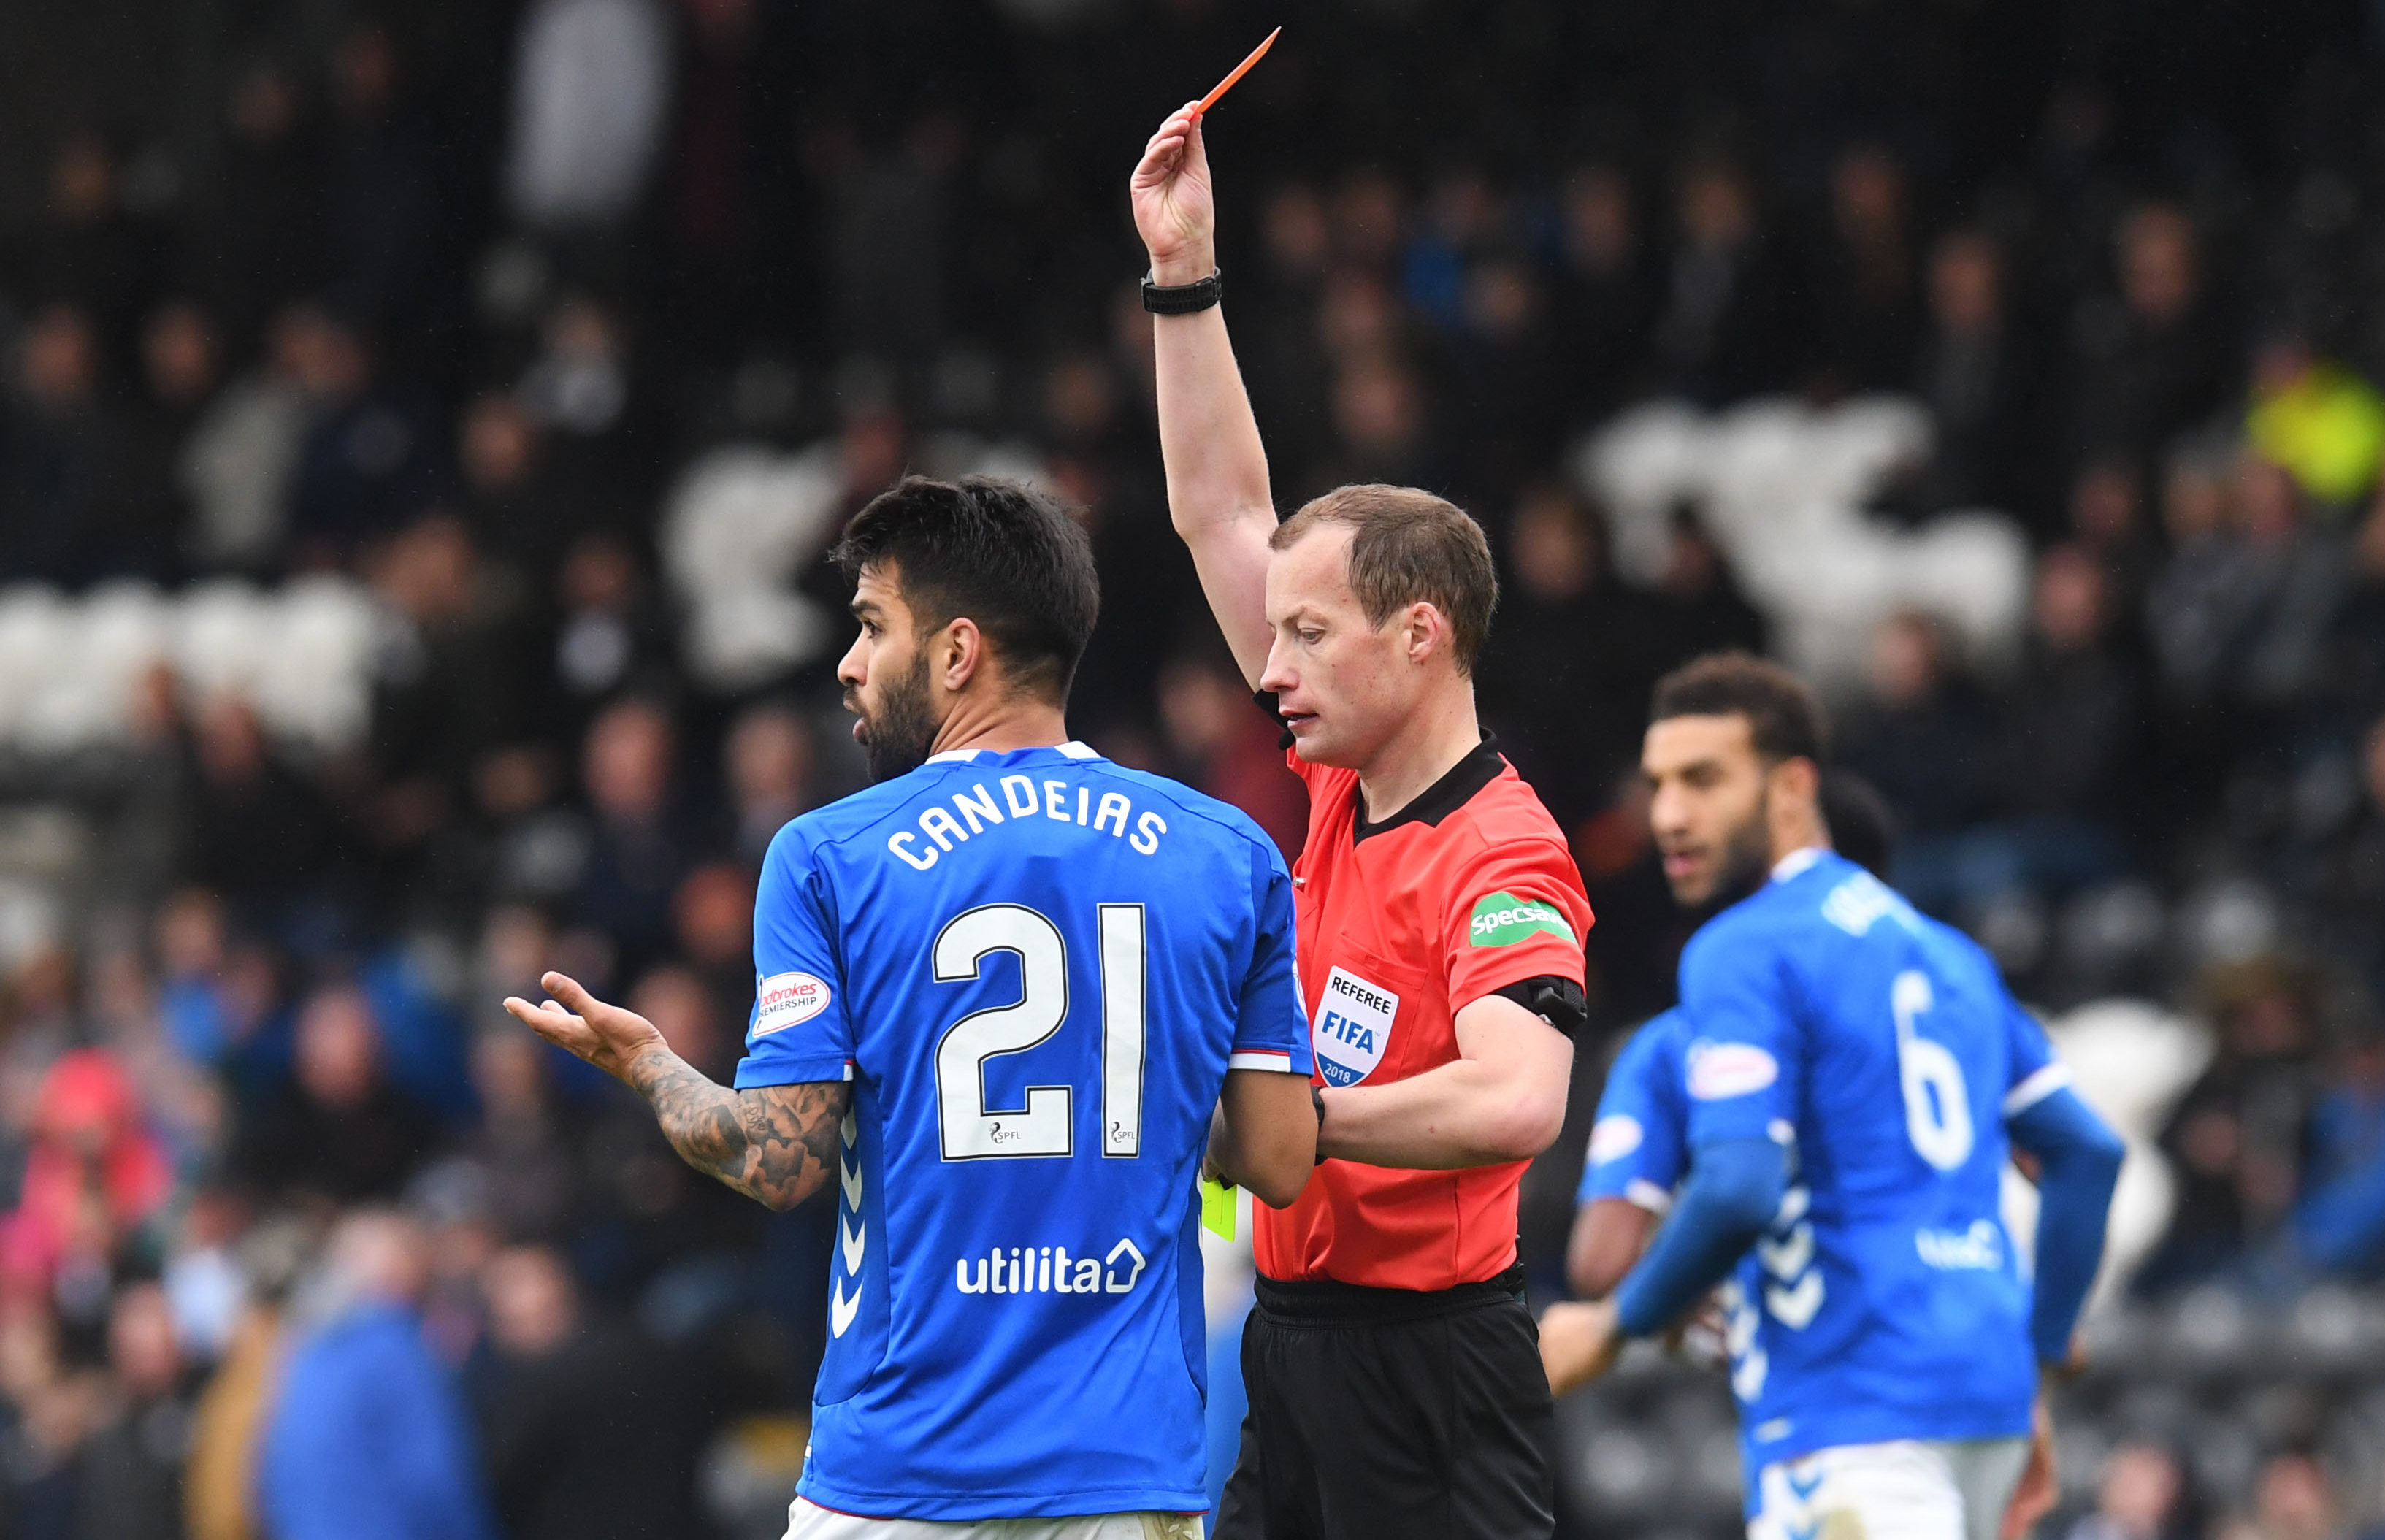 Rangers were unhappy with a second yellow card handed out to Daniel Candeias in their win over St Mirren (SNS Group / Craig Foy)